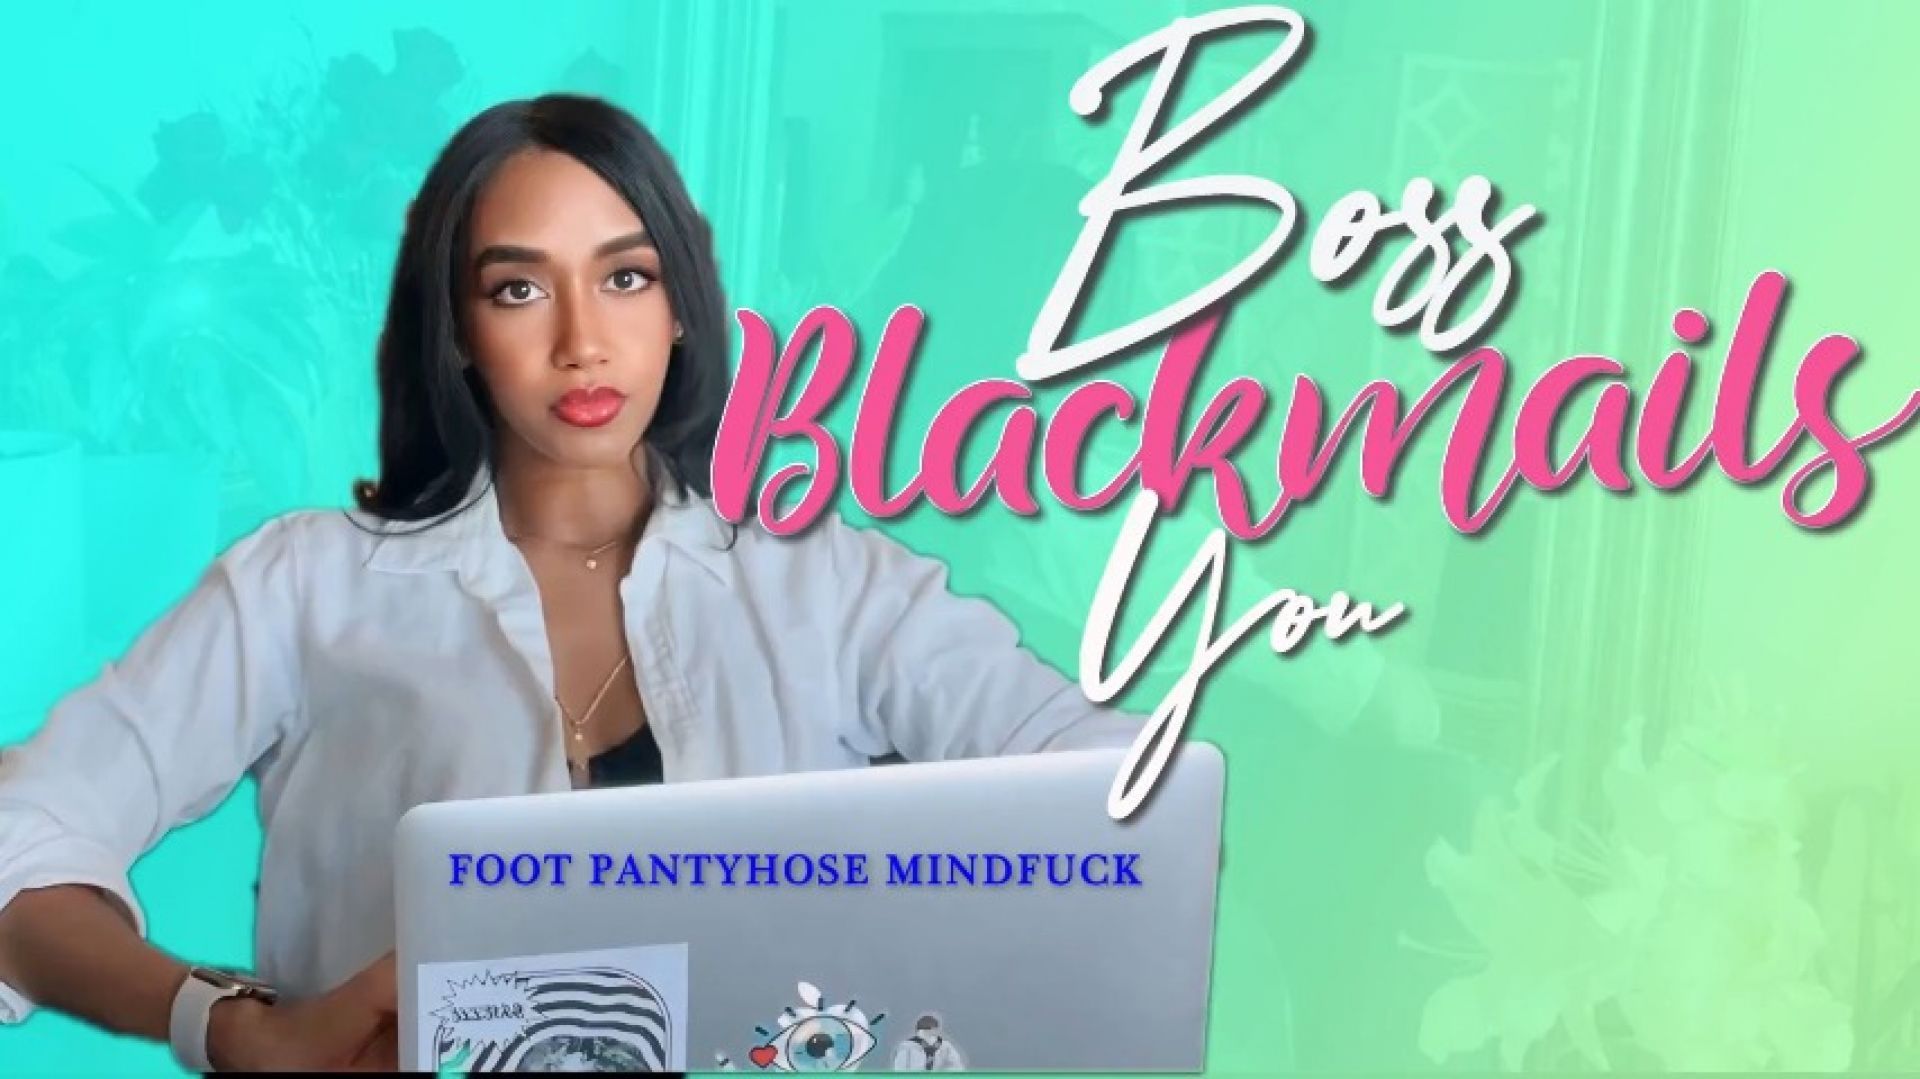 Boss Blackmails You - Foot Pantyhose Mindfuck | CC